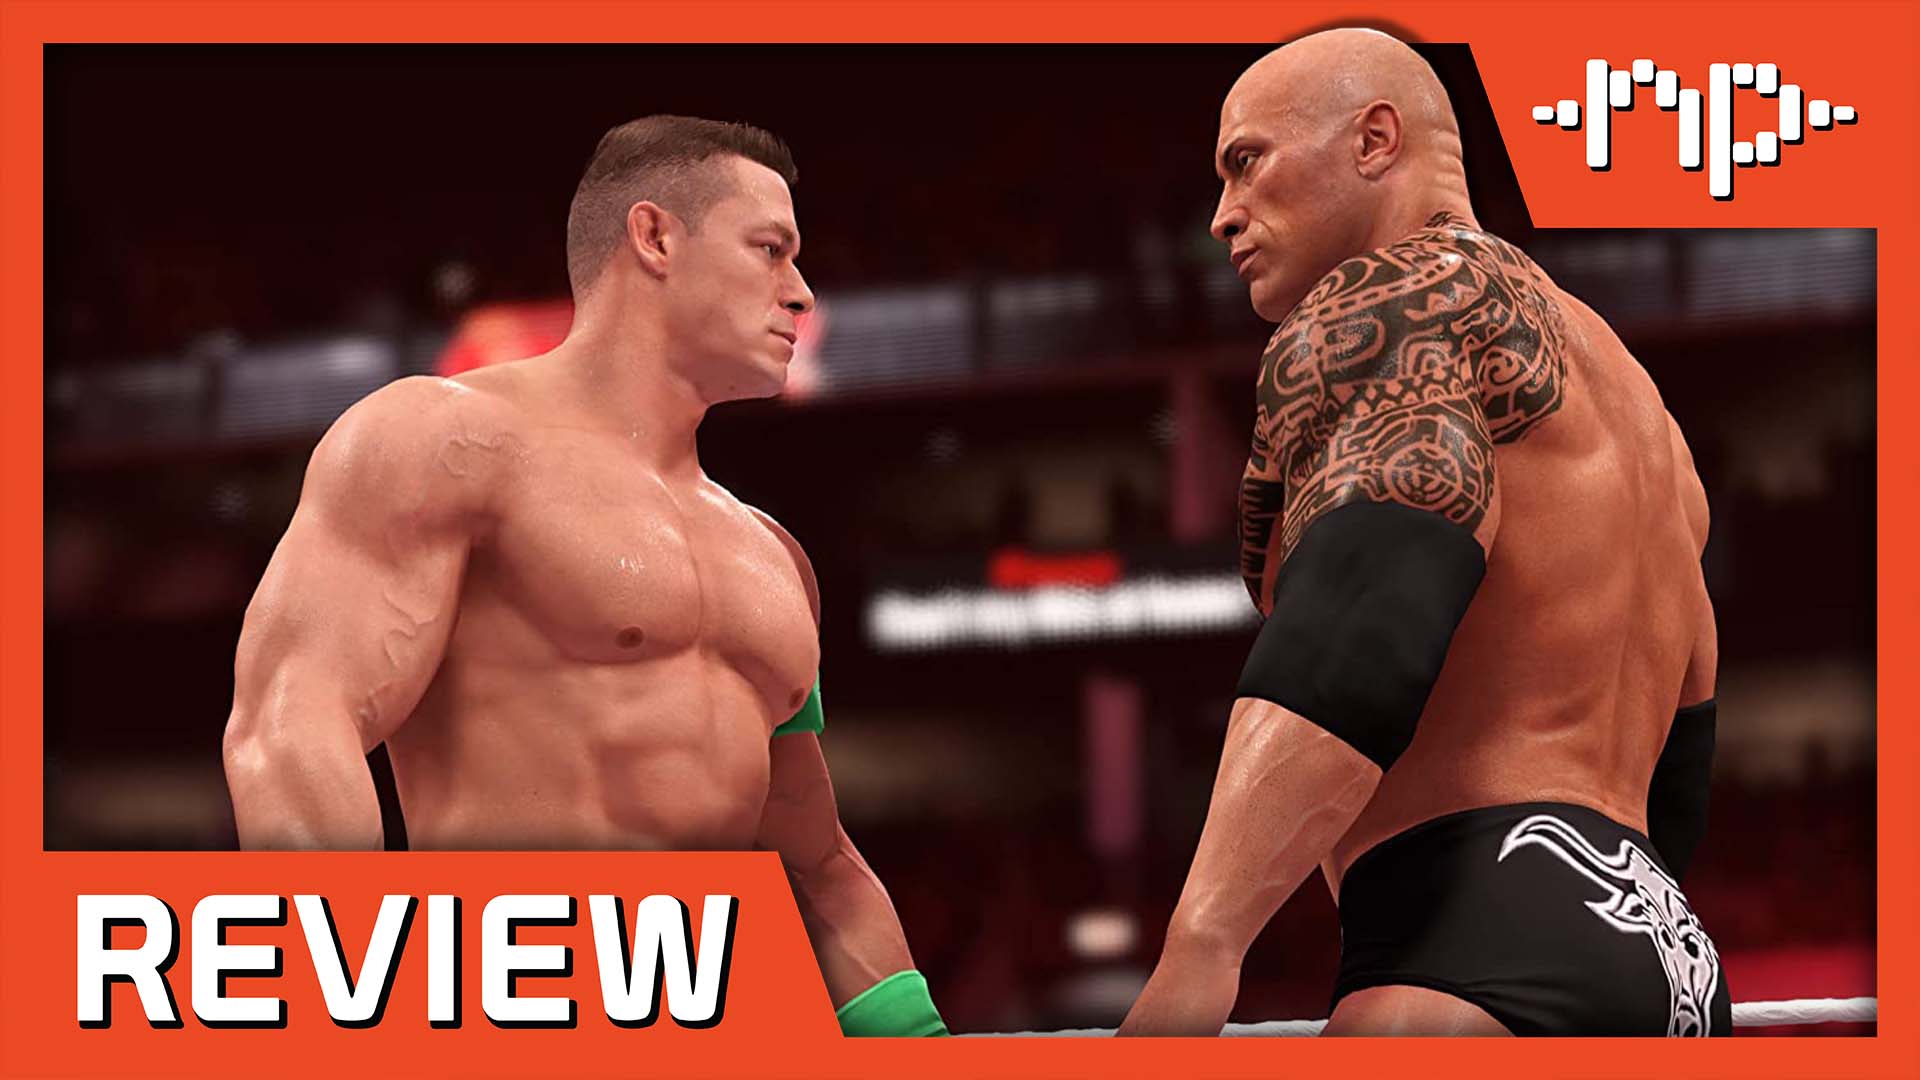 WWE 2K22 Review – So Many Ways to Play, So Little Fun